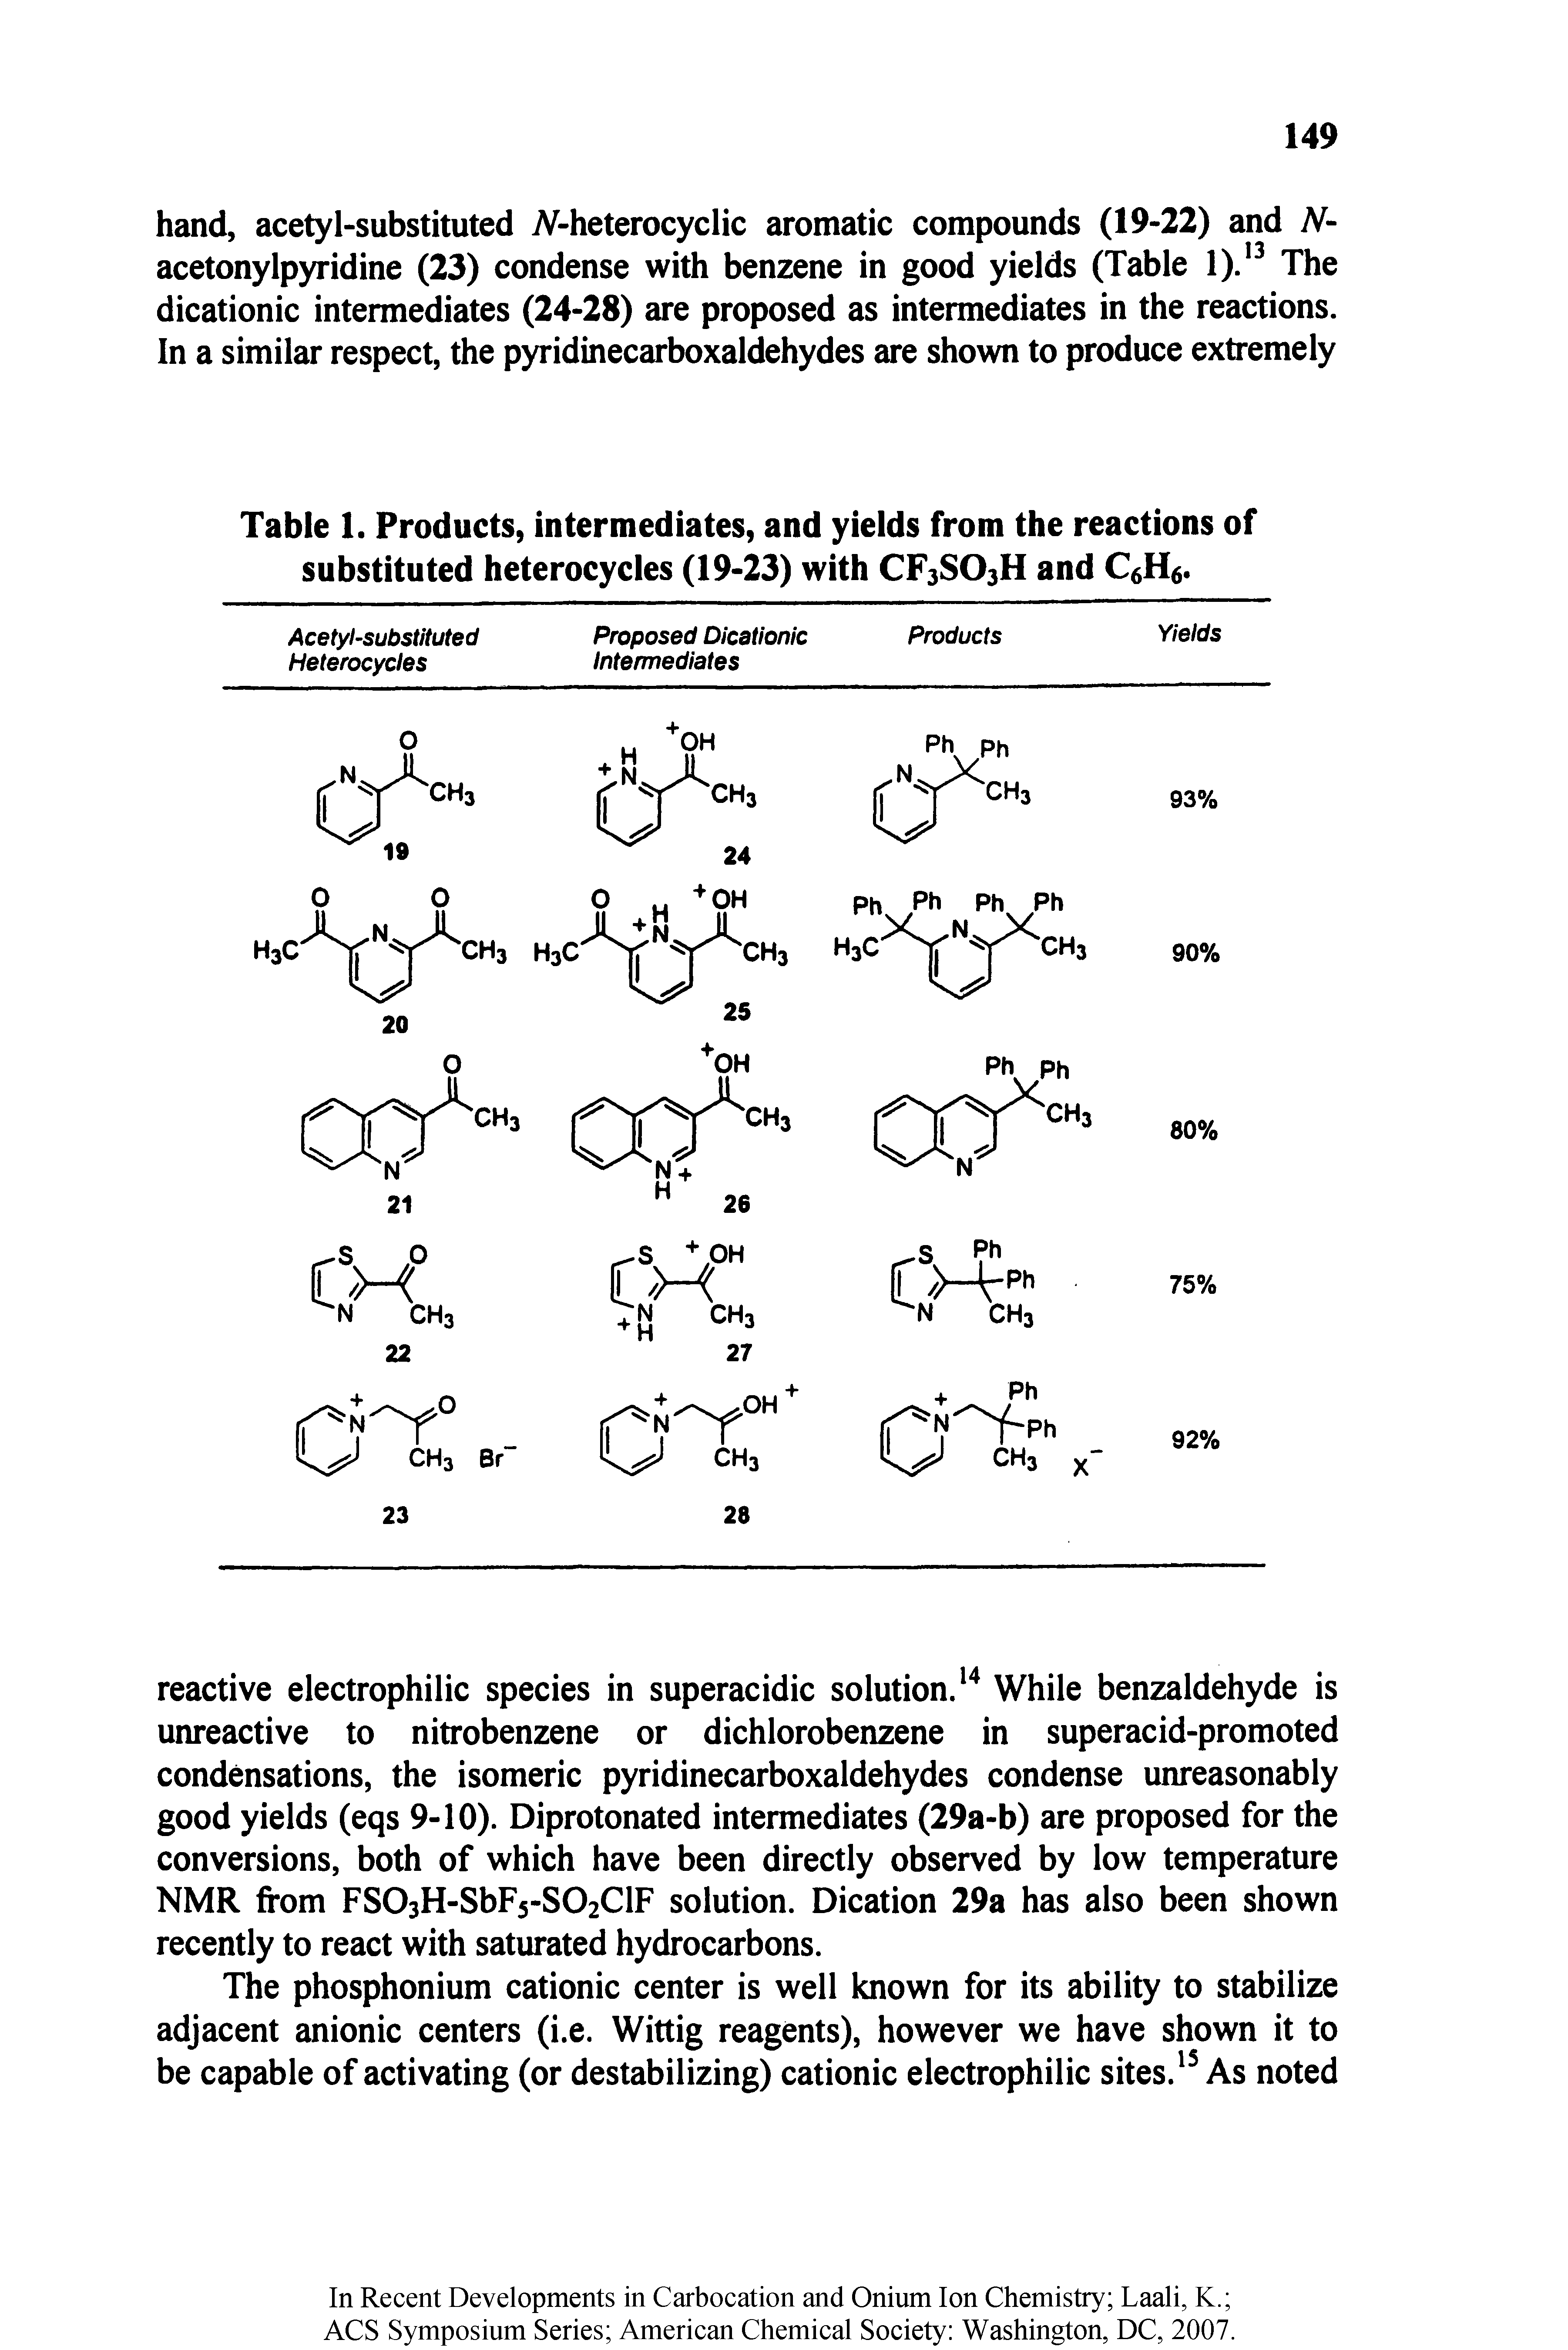 Table 1. Products, intermediates, and yields from the reactions of substituted heterocycles (19-23) with CF3S03H and C6H6.